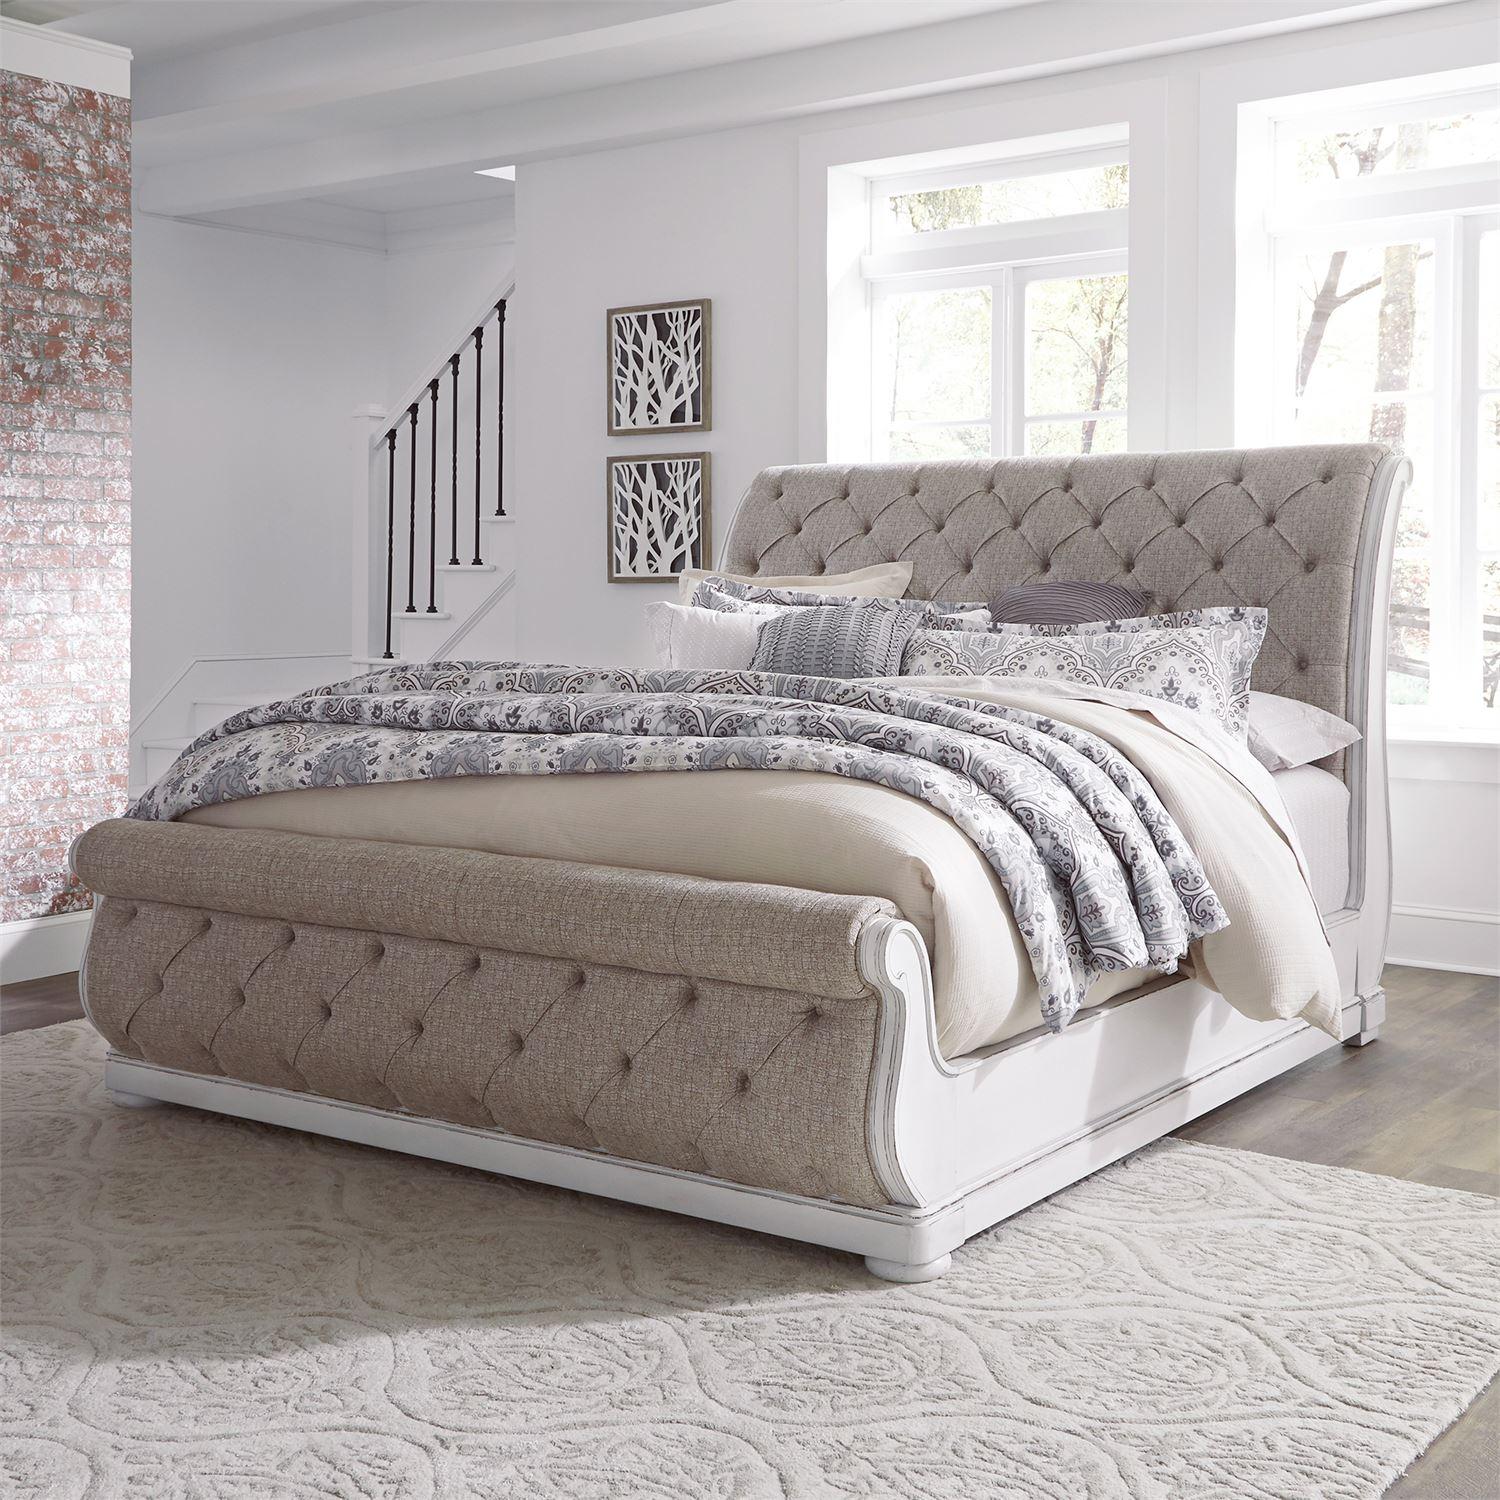 European Traditional Sleigh Bed Magnolia Manor  (244-BR) Sleigh Bed 244-BR-QUSL in White Chenille